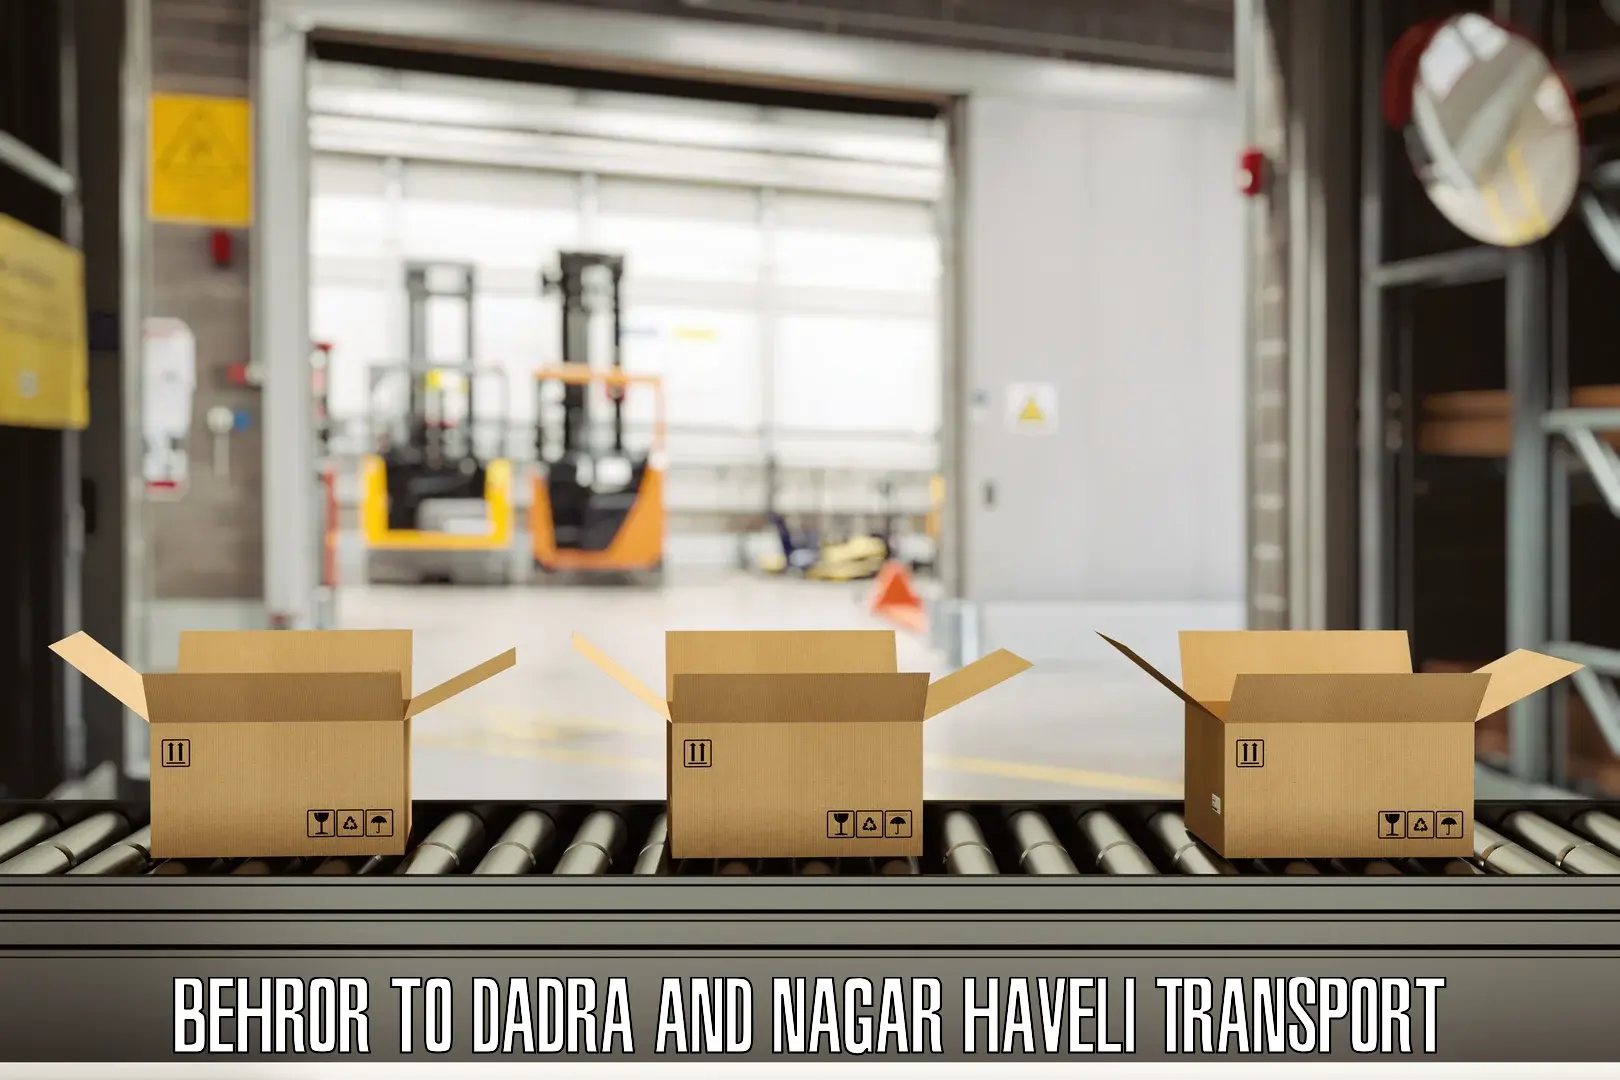 Truck transport companies in India Behror to Dadra and Nagar Haveli